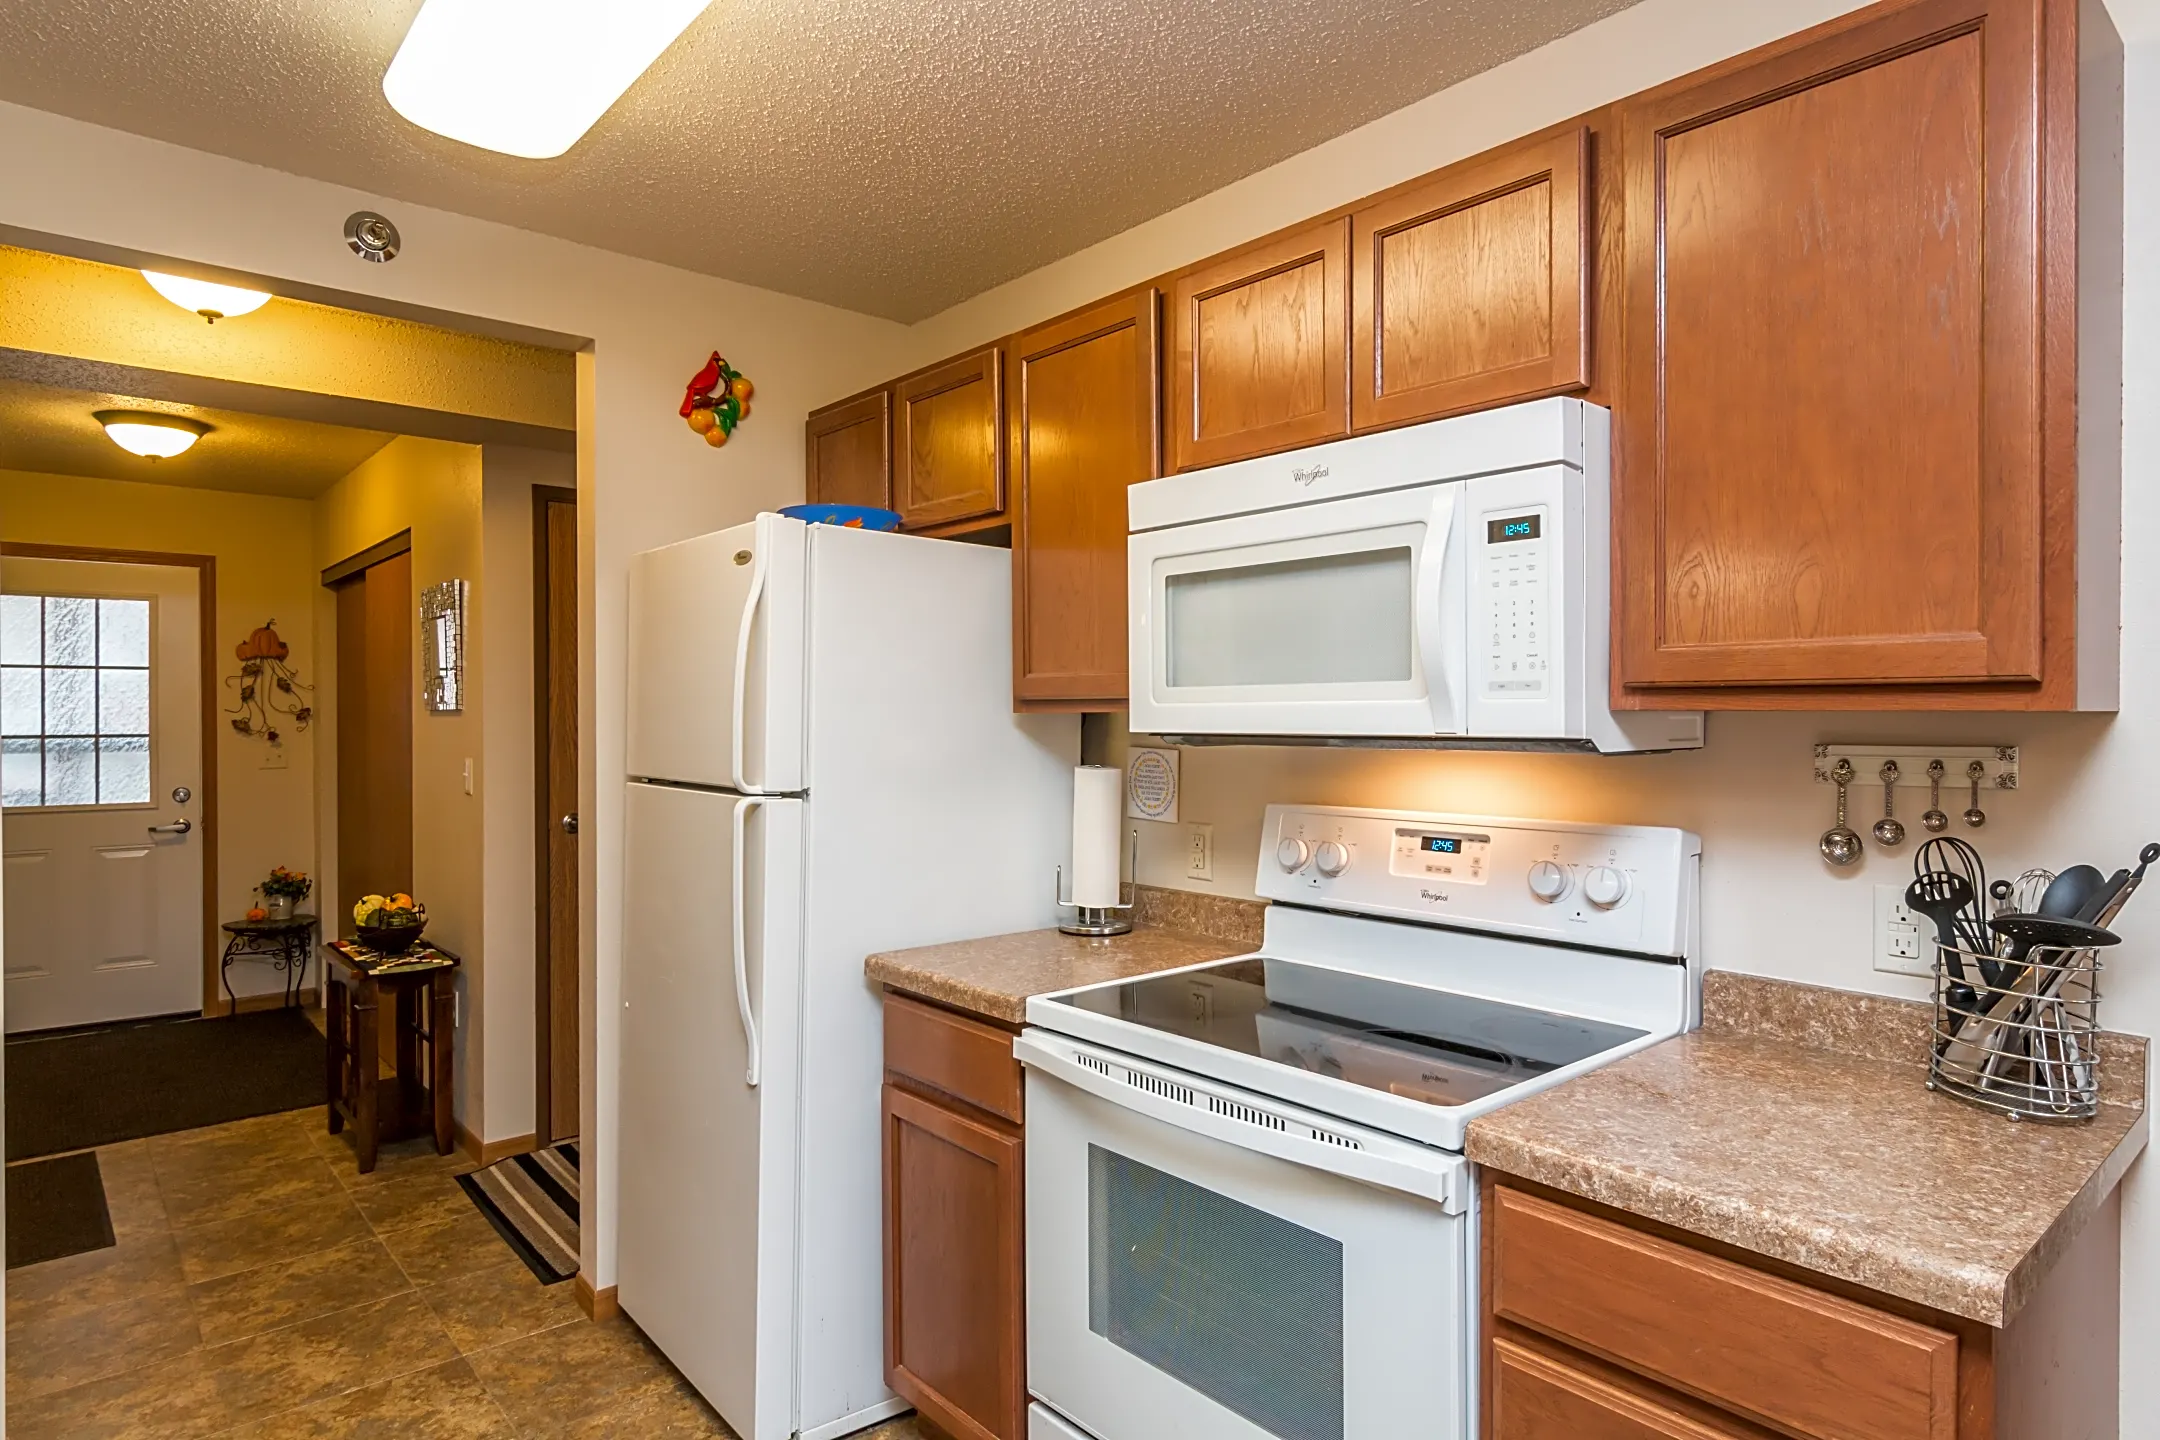 Kitchen - Dakota Commons Townhomes and Apartments - West Fargo, ND